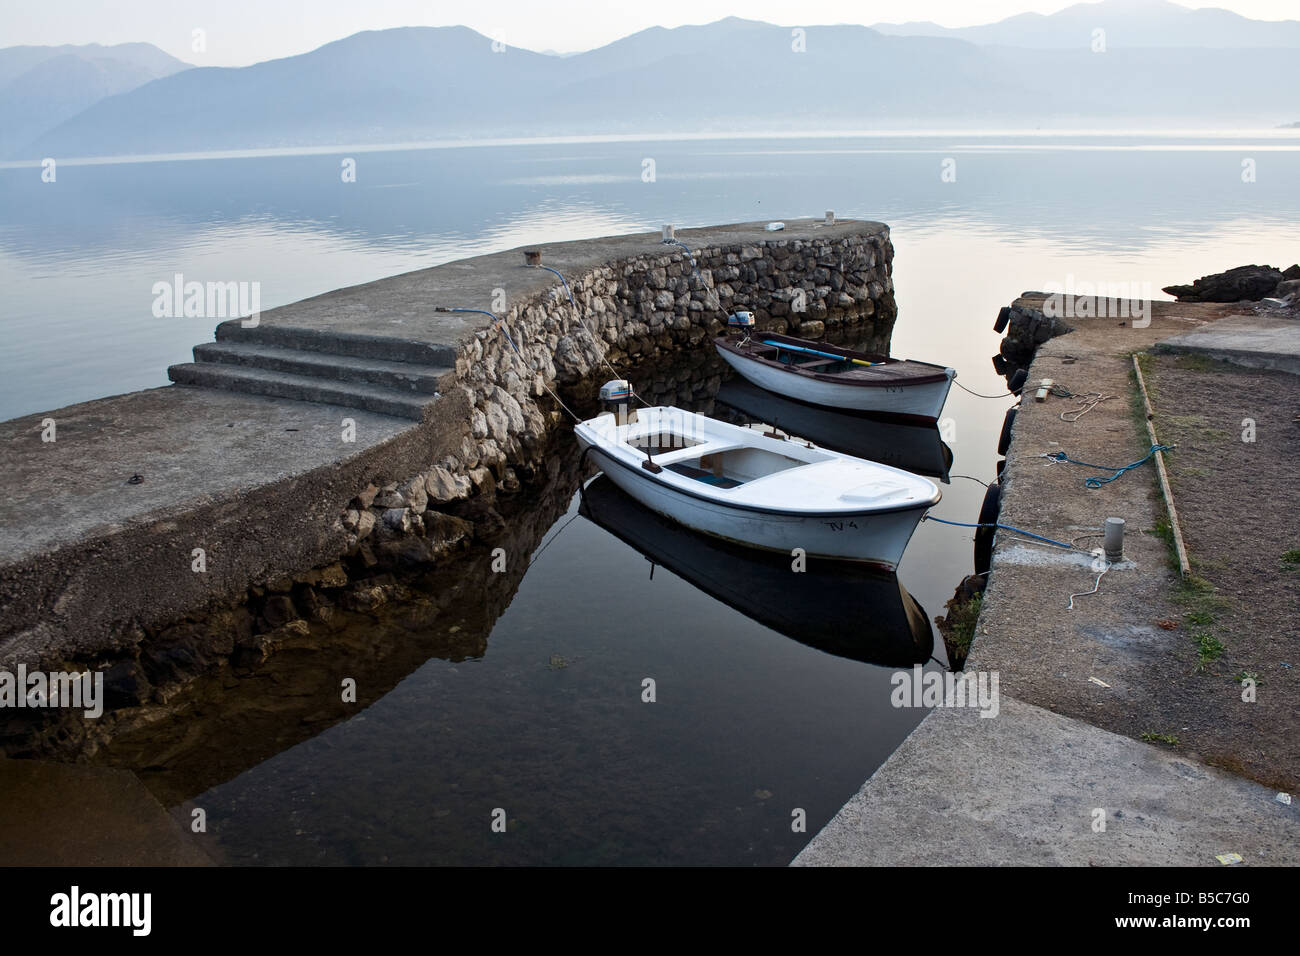 two wooden boats in a little bay in the morning, Kotor, Montenegro Stock Photo